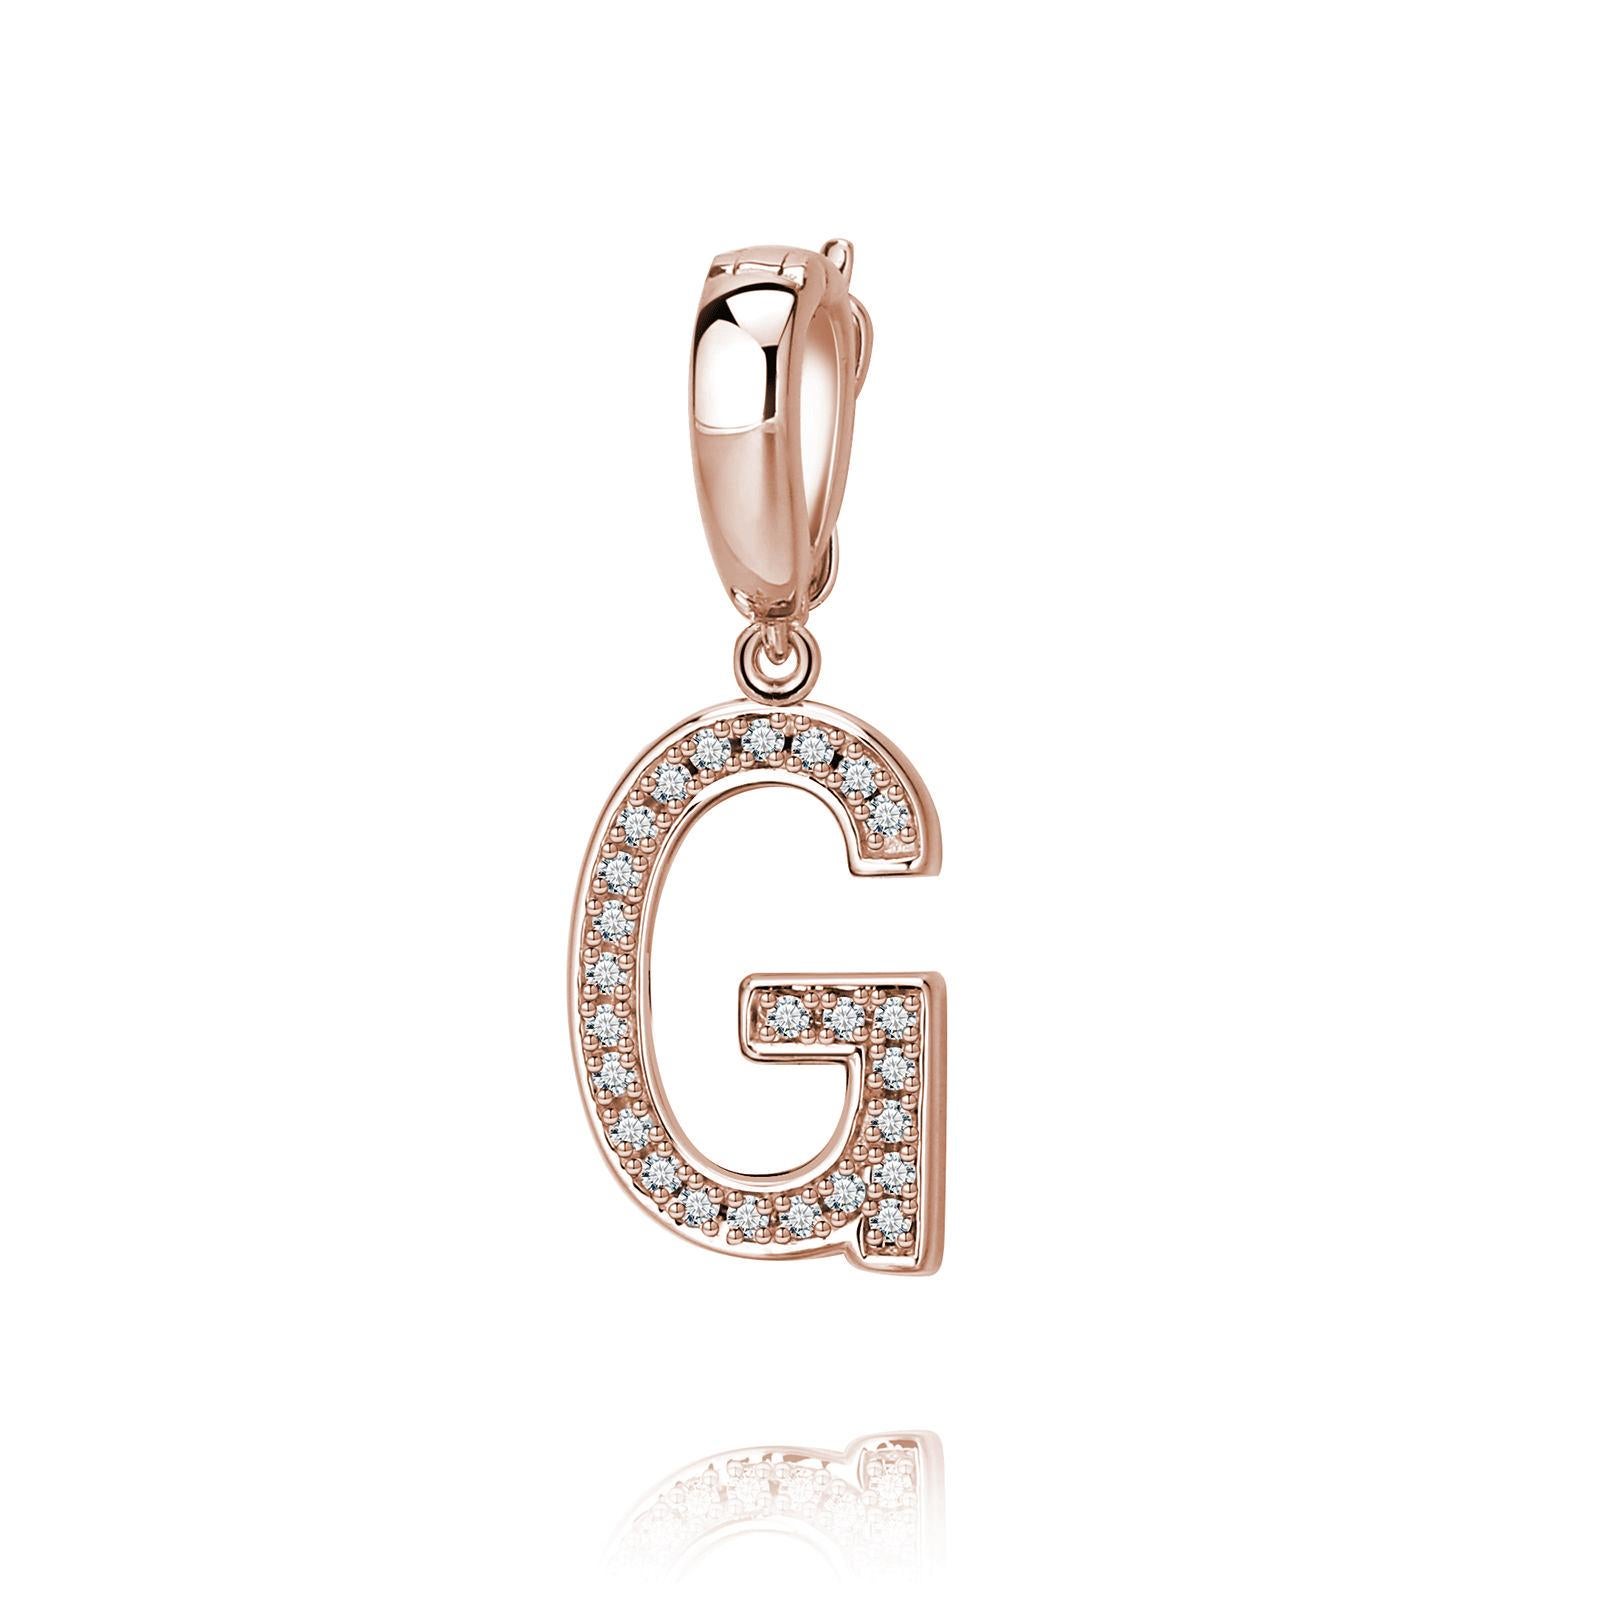 Nothing says YOU more than YOU. You are unique. You are bold.  You're not afraid to share who you are.  This initial pendant/ charm is elegantly slimline while sharing a little bit about yourself with others. .925 sterling silver base also available